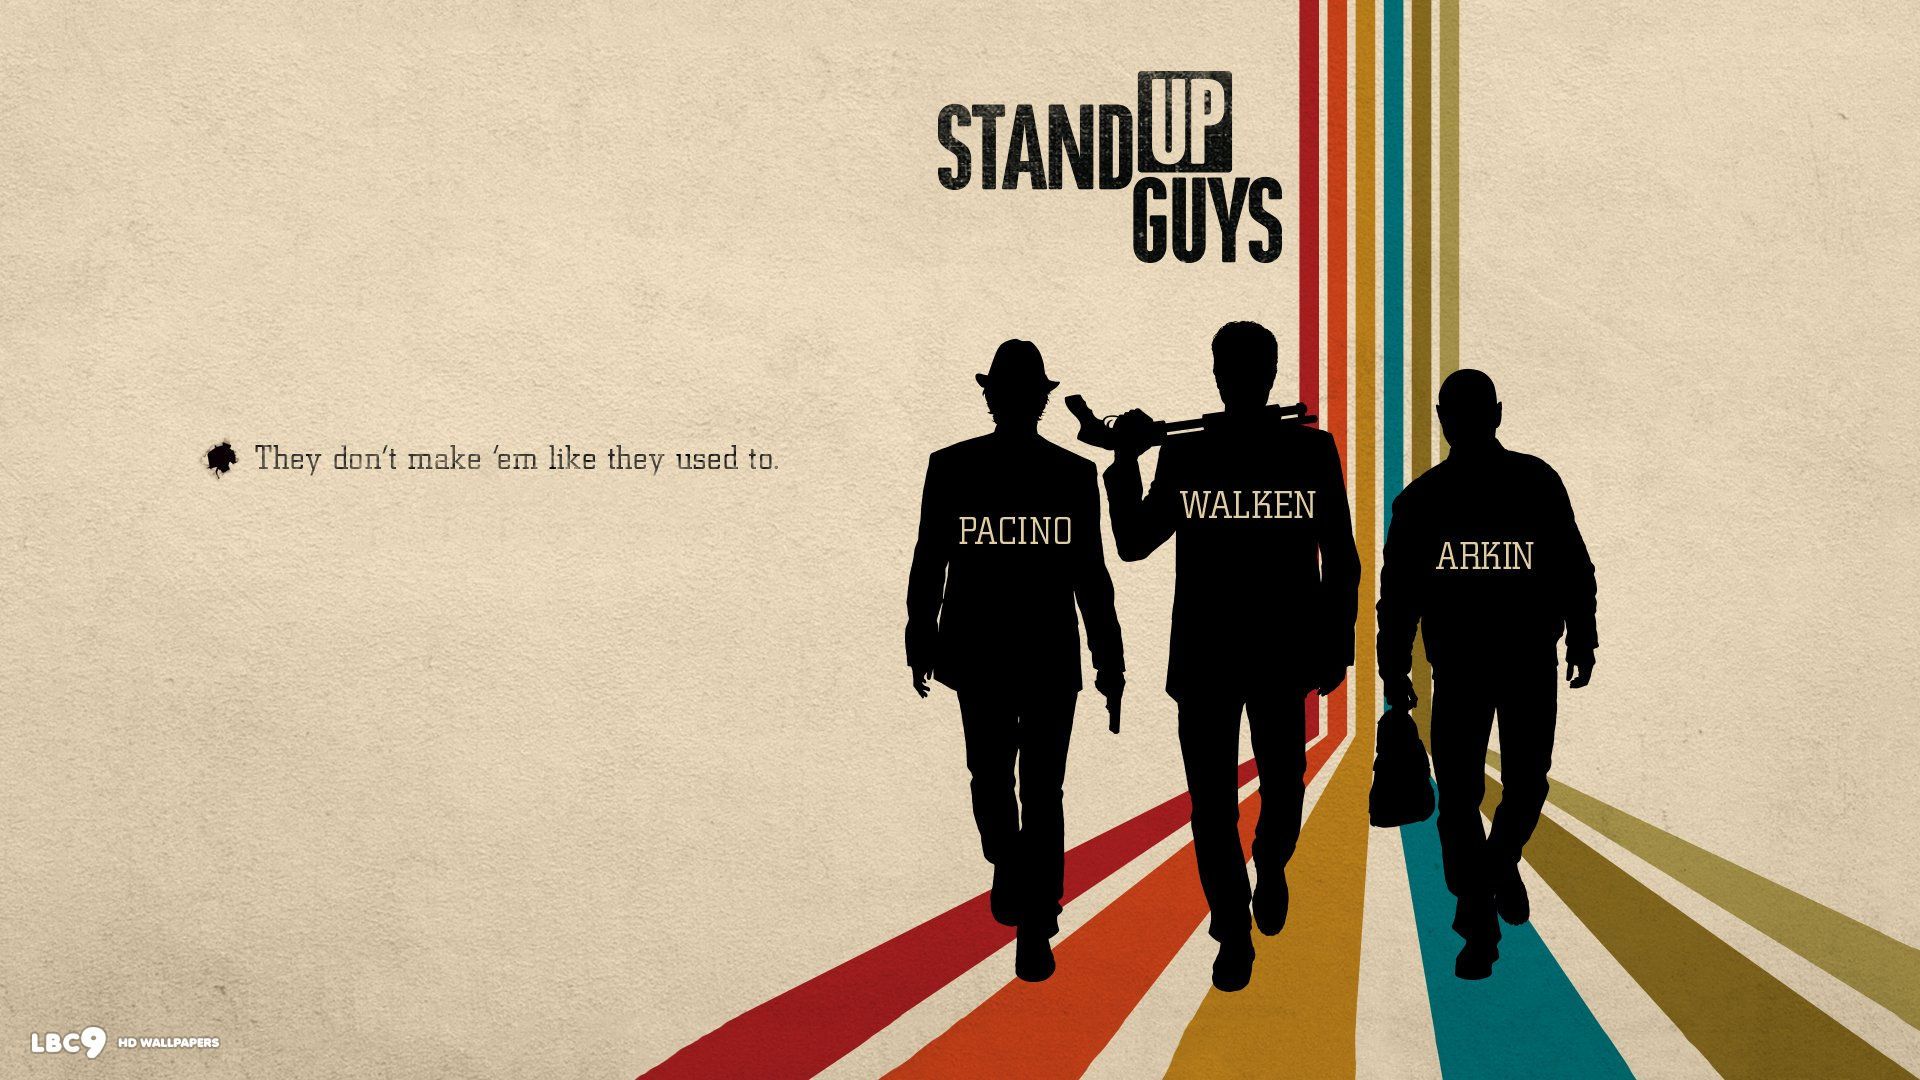 Stand up guys wallpaper 1 / 2 movie hd backgrounds